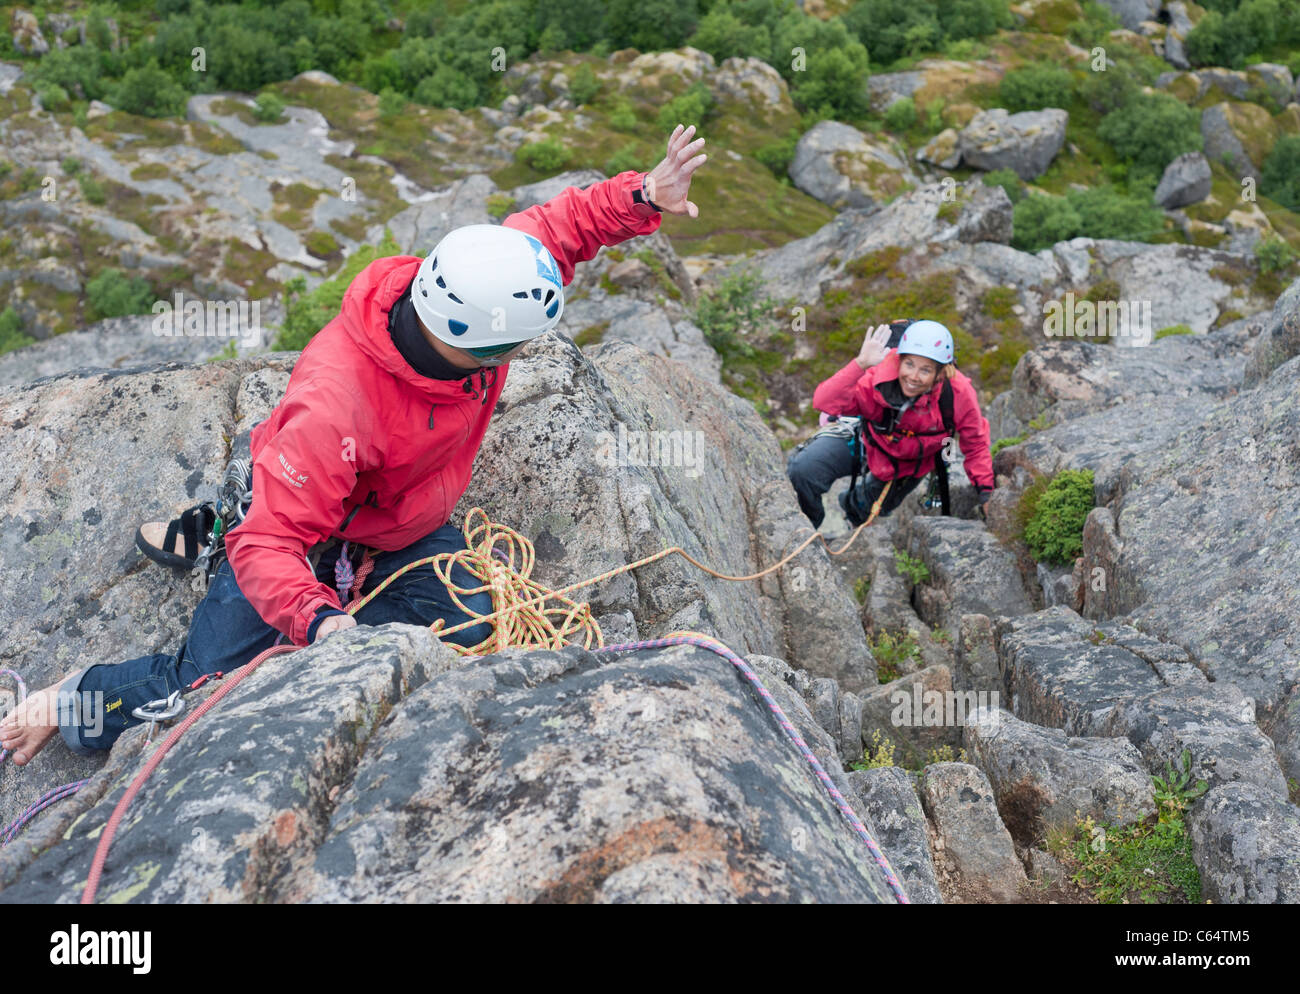 Grip Norway High Resolution Stock Photography and Images - Alamy